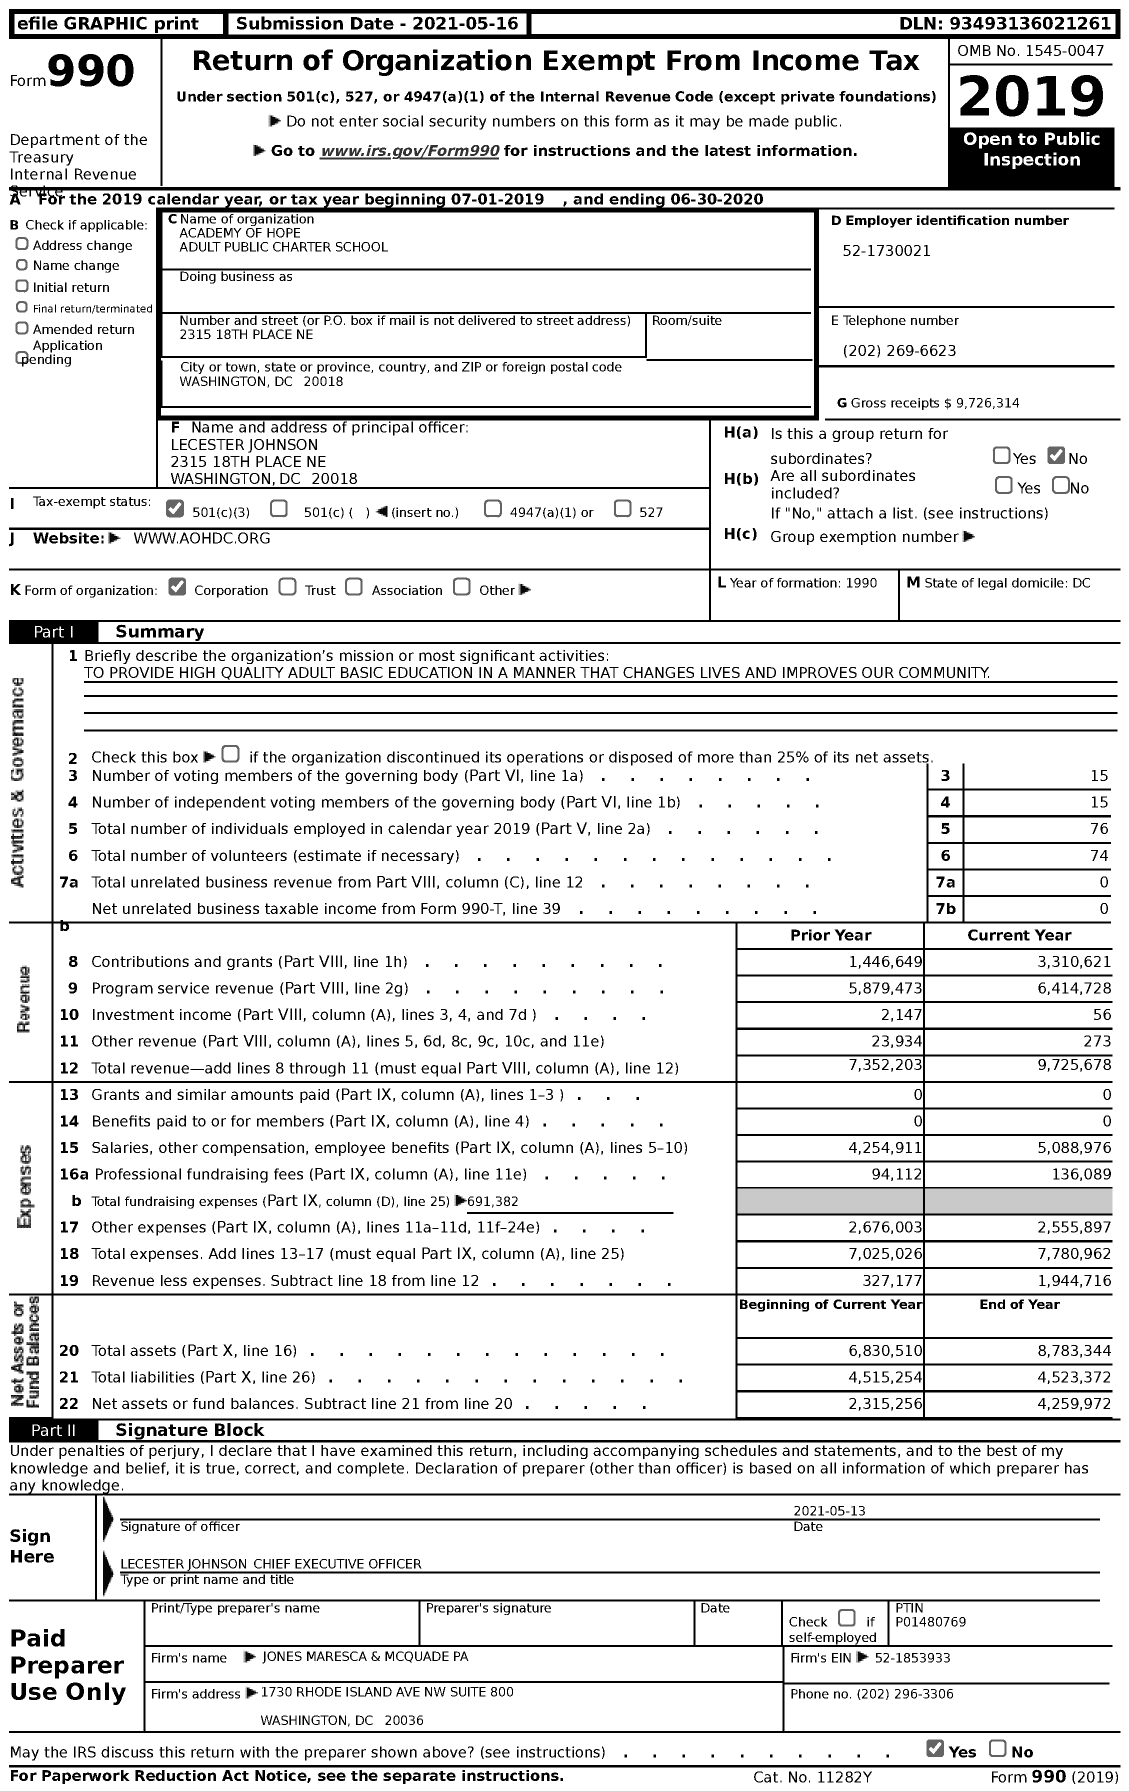 Image of first page of 2019 Form 990 for Academy of Hope Adult Public Charter School